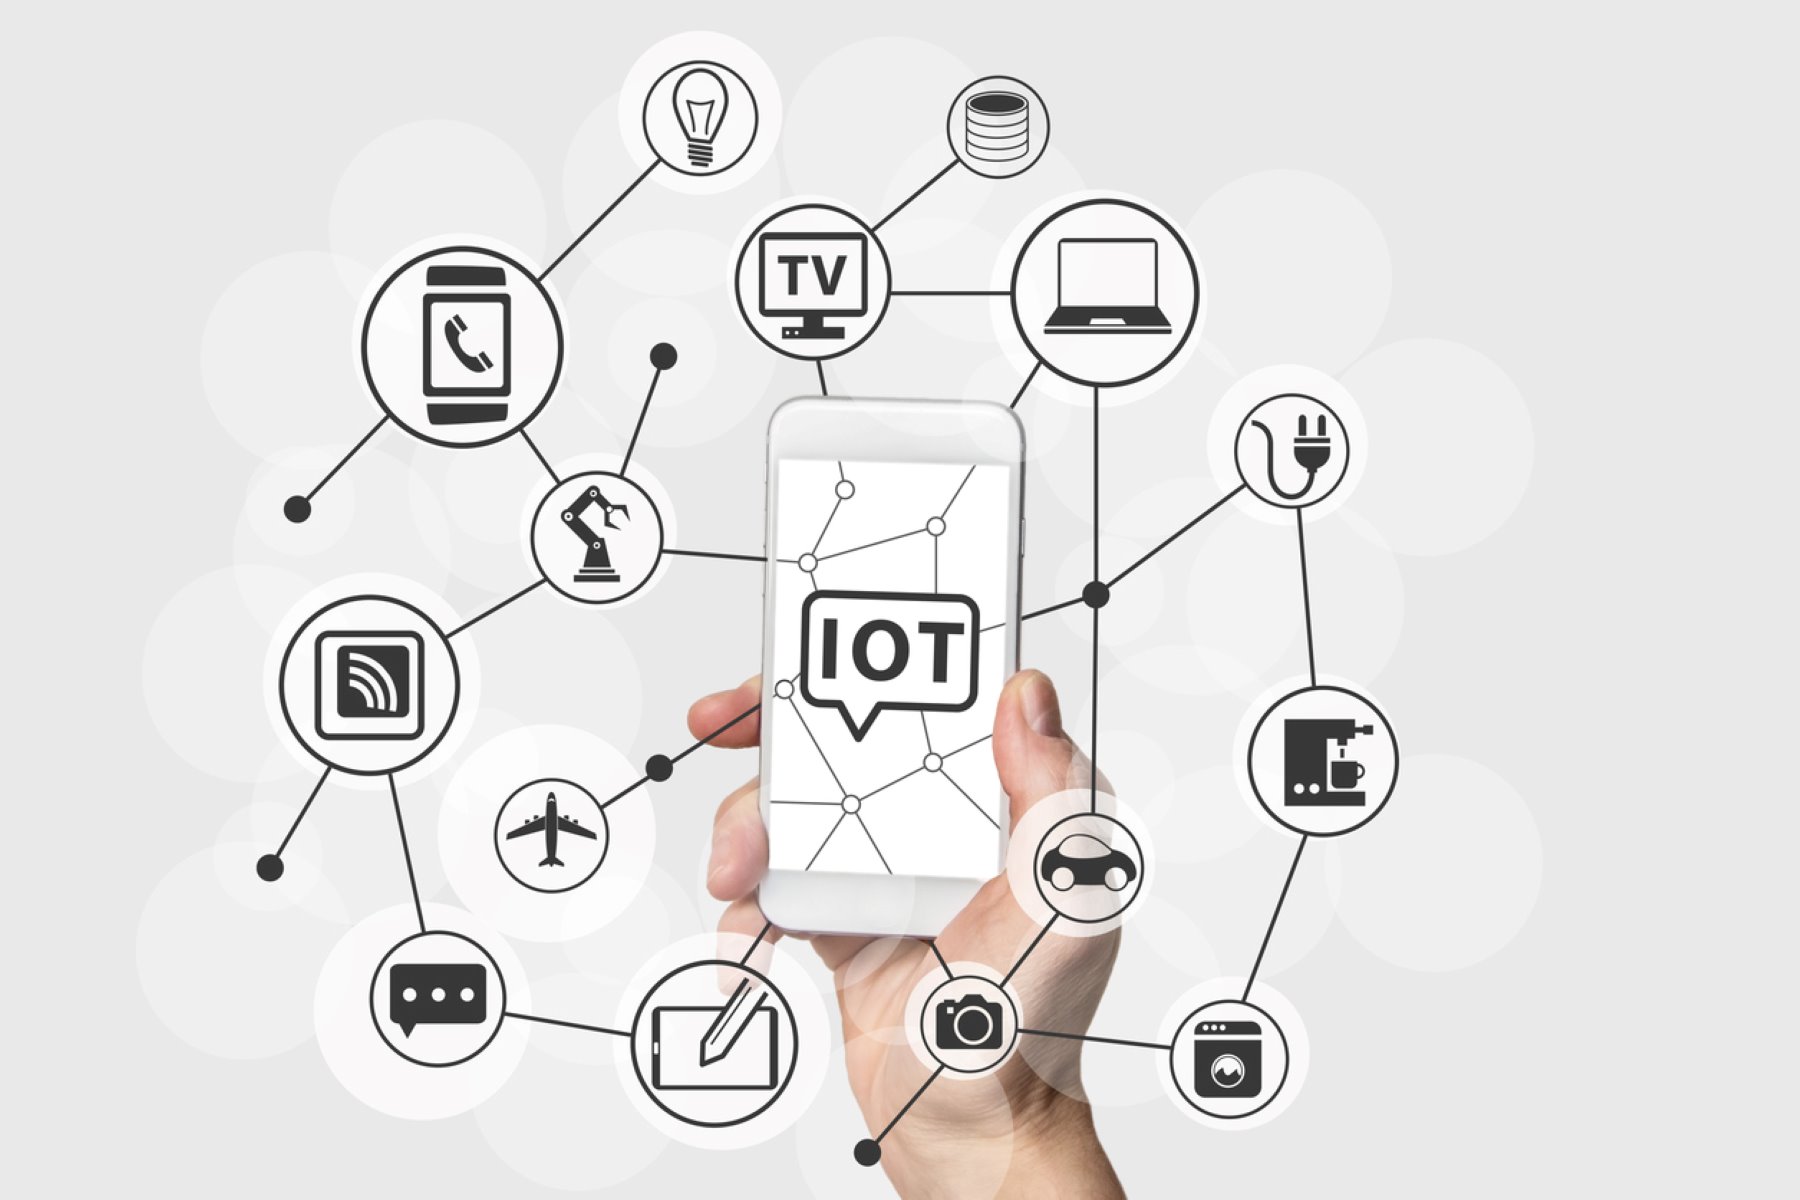 What Uses The Internet Of Things